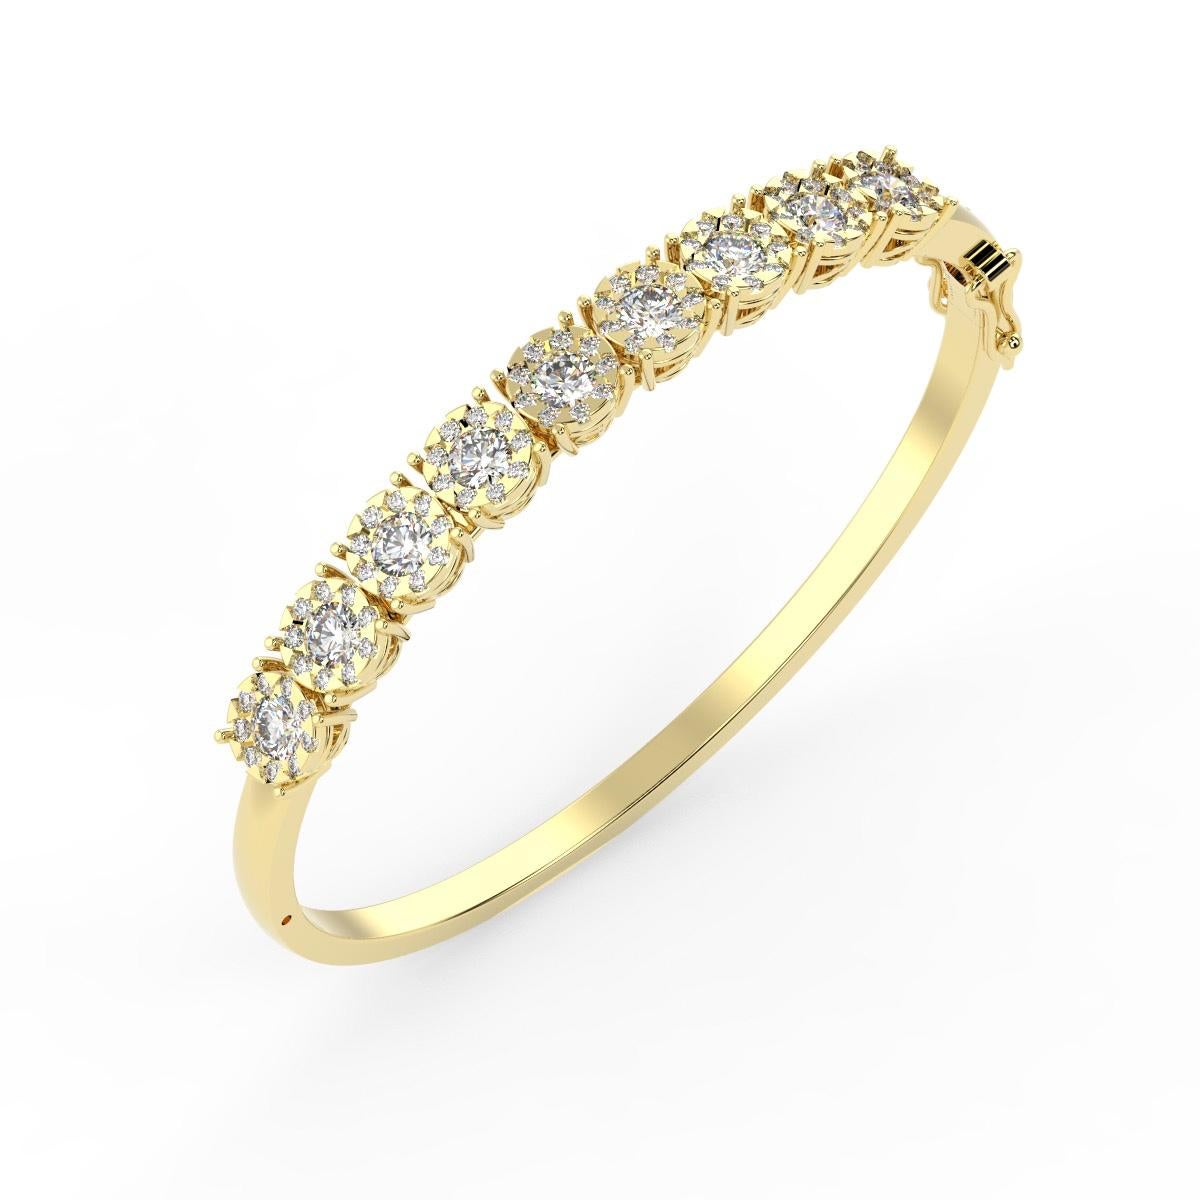 This diamond bangle showcases petite round diamonds Micro Prong-set in 14k white gold diamond halo of diamond for a total carat weight of 3.25 total carat weight.

Product details: 

Center Gemstone Type: NATURAL DIAMOND
Center Gemstone Color: